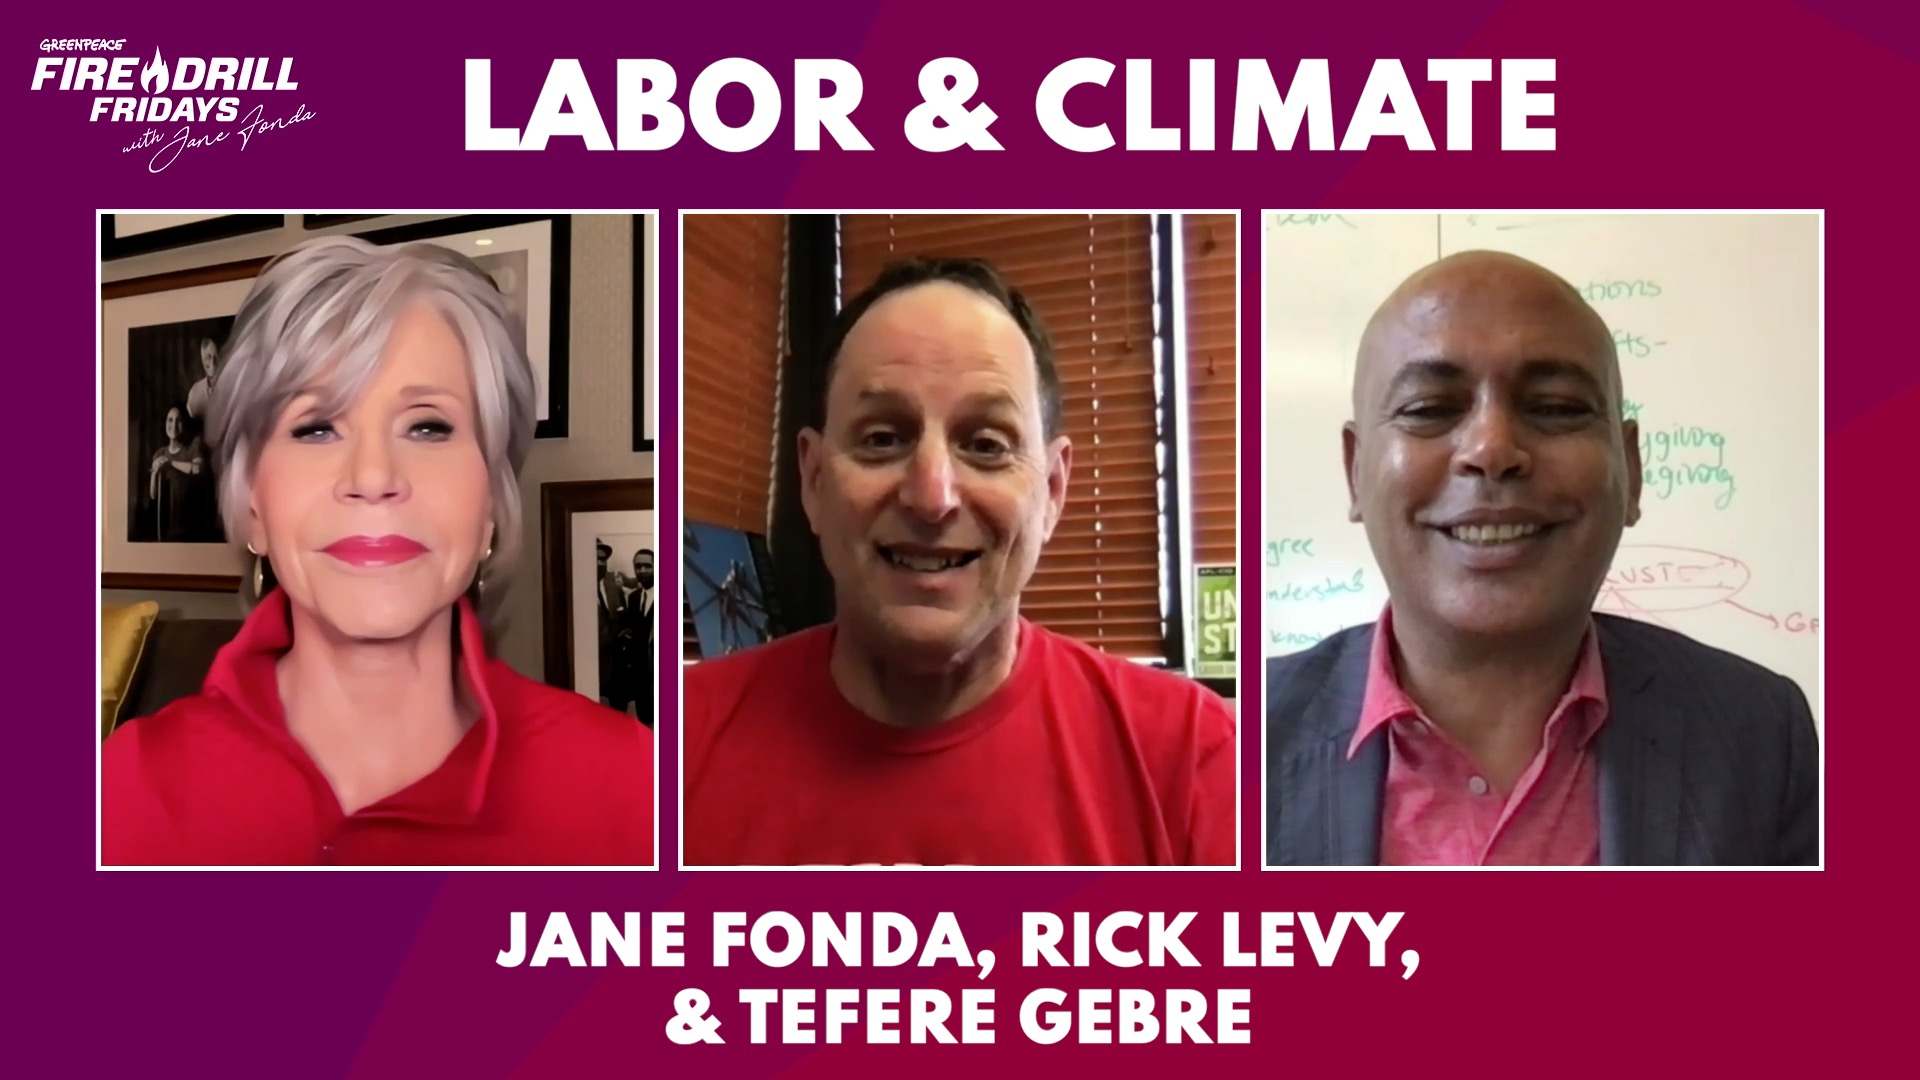 Watch Tefere Gebre & Rick Levy Discuss the Intersections of the Climate and Labor Movements